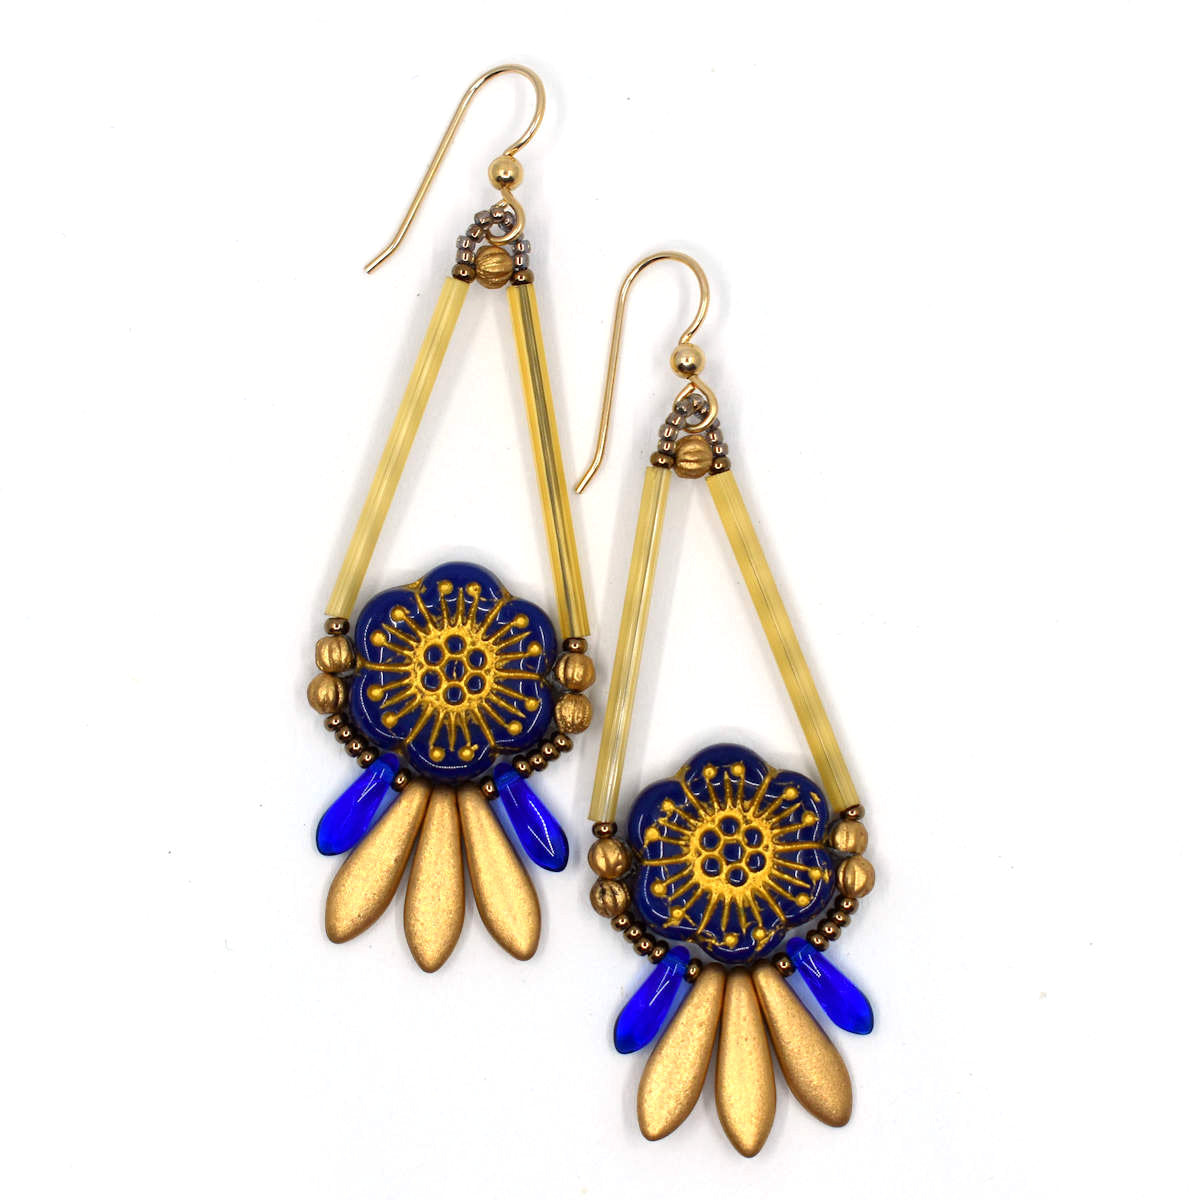 Gold and dark blue earrings with gold wires lay on a white background. The earrings are teardrop shapes, with the top formed by long gold tube beads. The circular part of the drop is filled with a dark navy blue flower with embossed gold details. Below the teardrop is a fringe of dagger beads, small blue ones on the outer edges and three larger matte gold daggers in the middle.